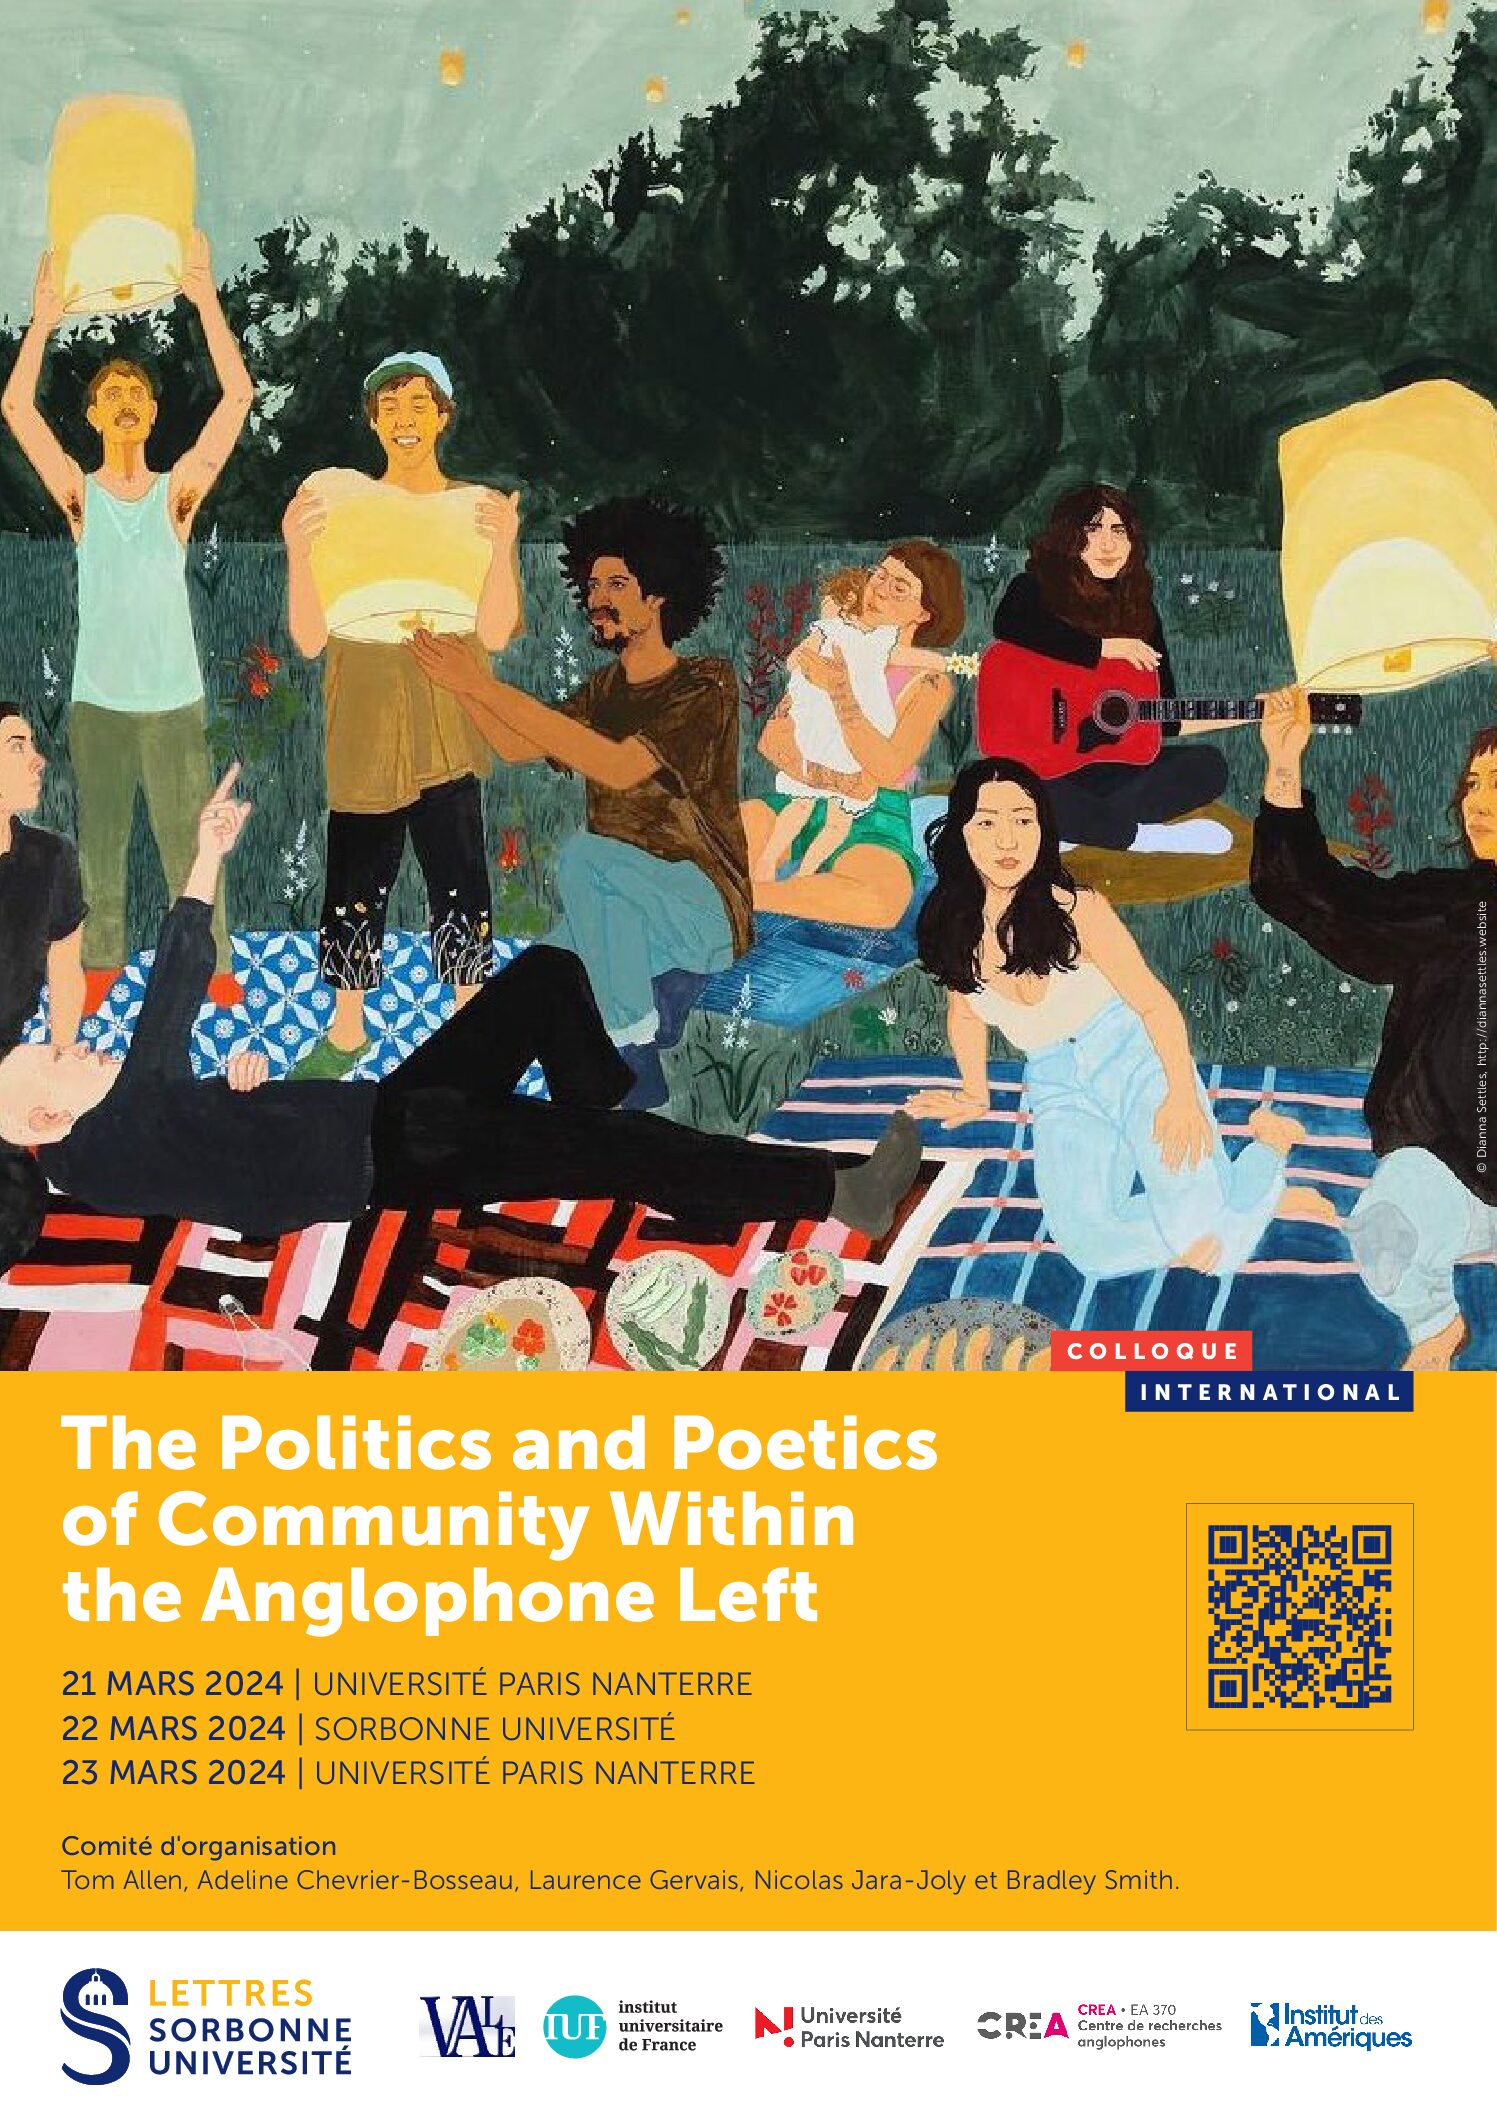 You are currently viewing COLL 21-22-23 mars 2024 -The Politics and Poetics of Community within the Anglophone Left – Sorbonne / Nanterre